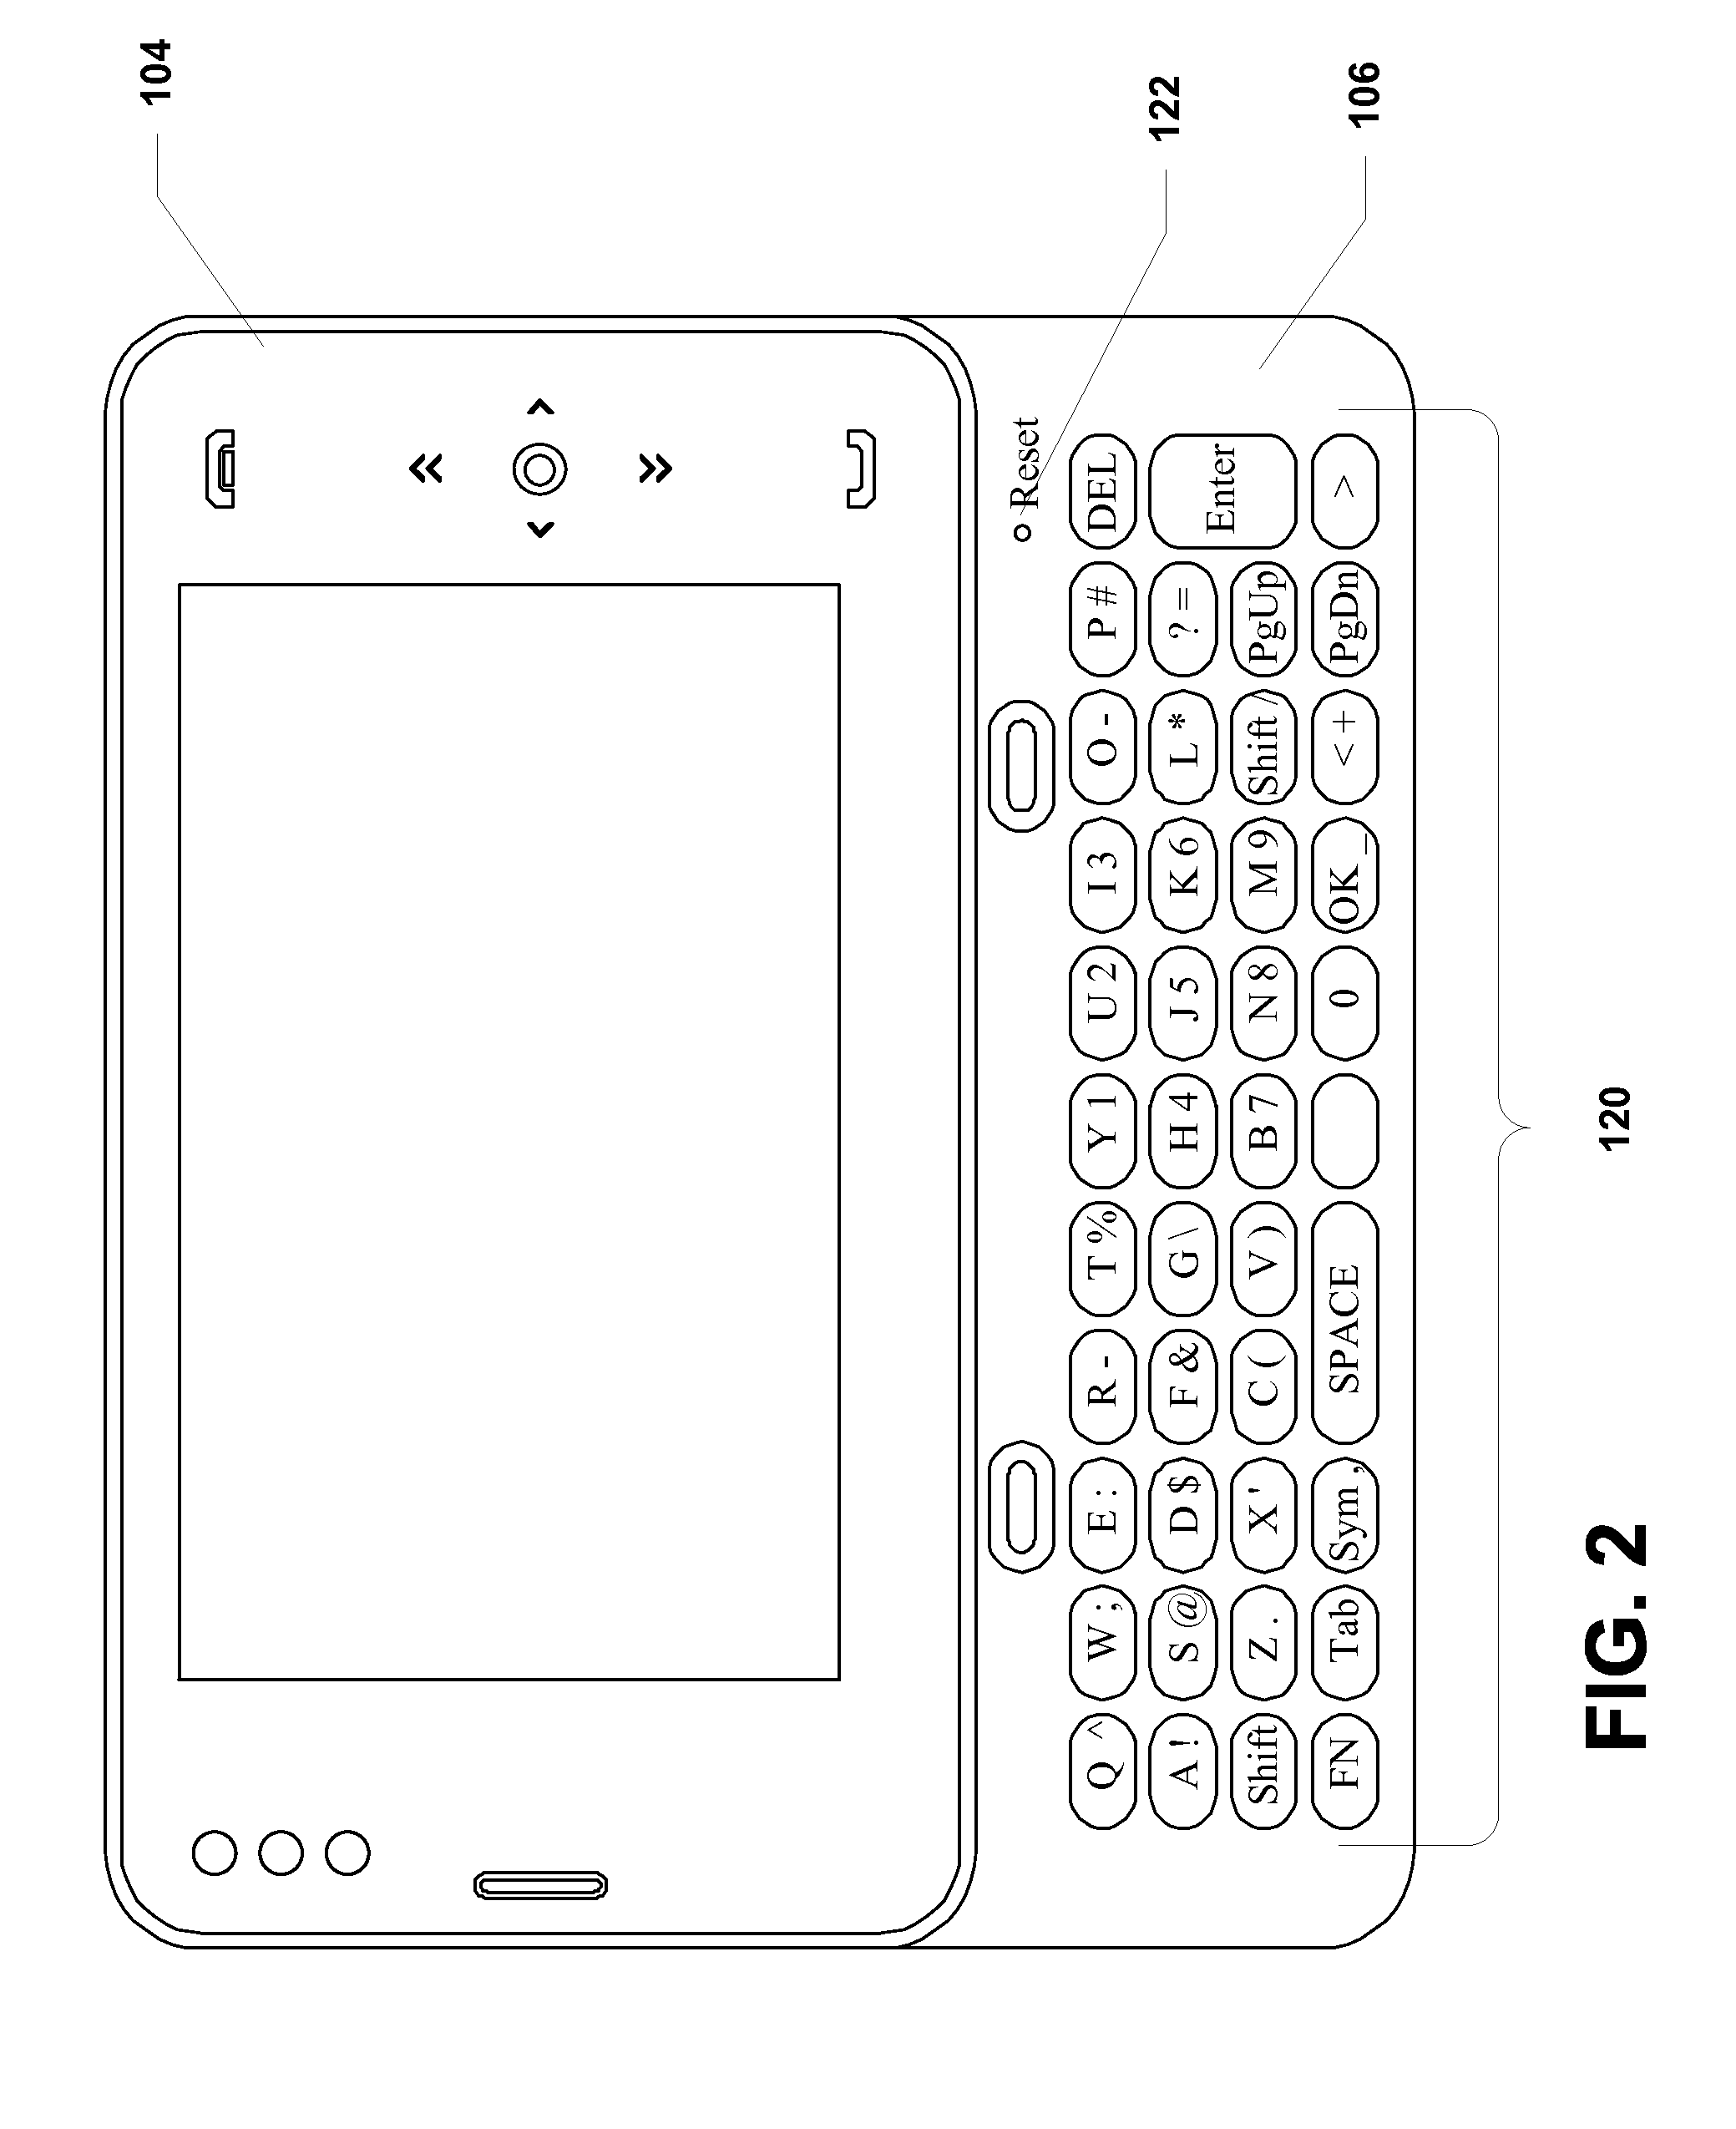 System and method of providing wireless connectivity between a portable computing device and a portable computing device docking station